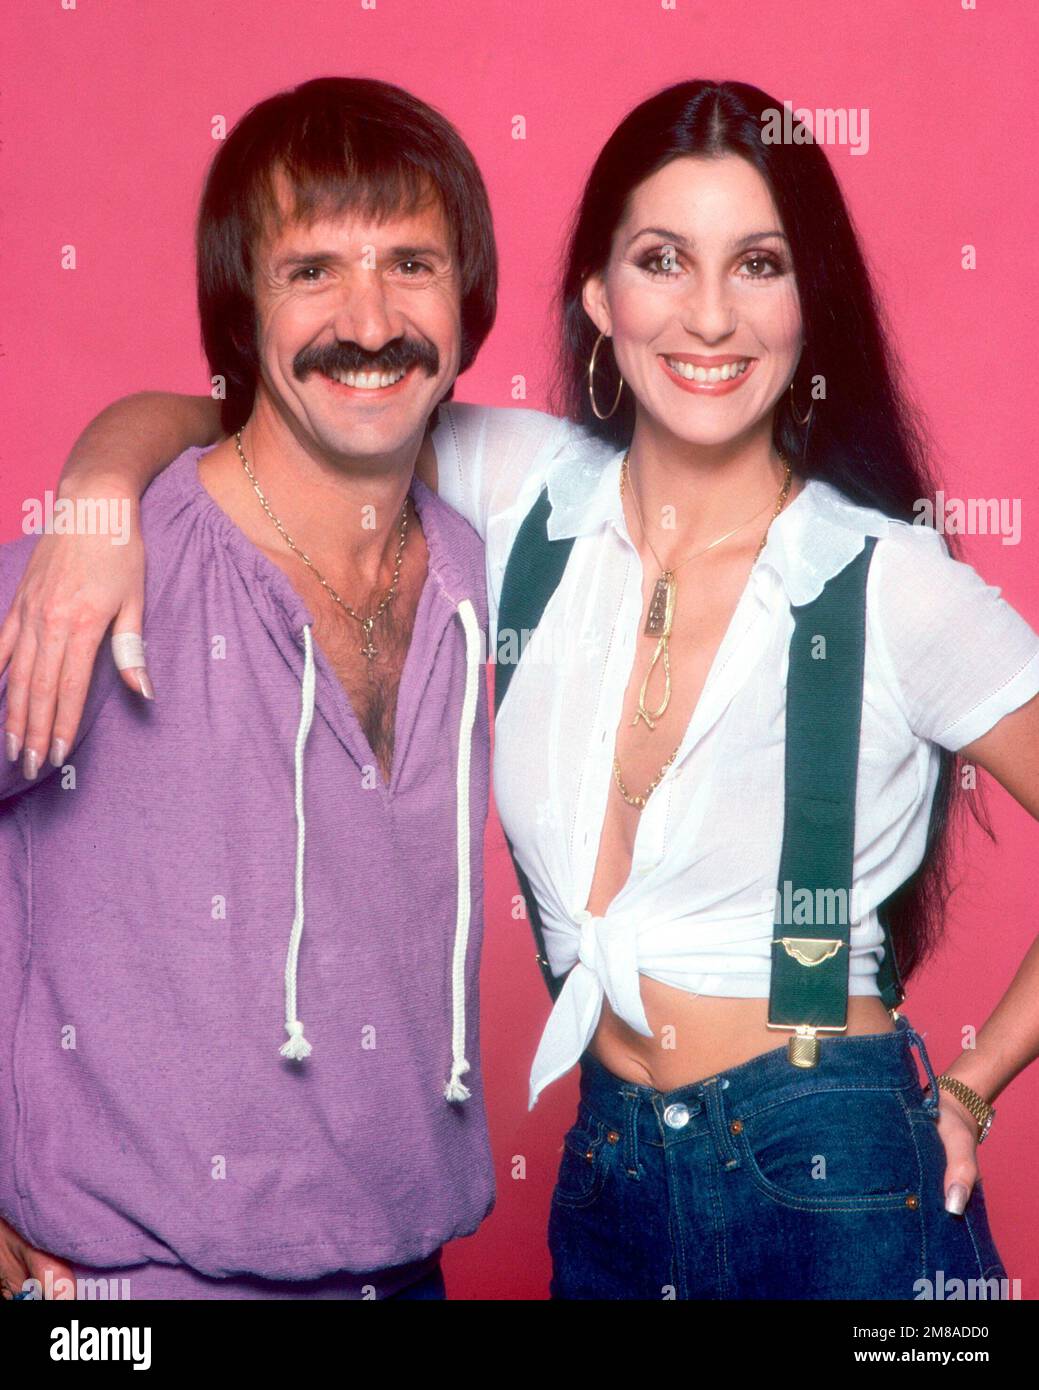 SONNY BONO and CHER in THE SONNY AND CHER COMEDY HOUR (1971), directed by ART FISHER. Credit: Columbia Broadcasting System (CBS) / Album Stock Photo